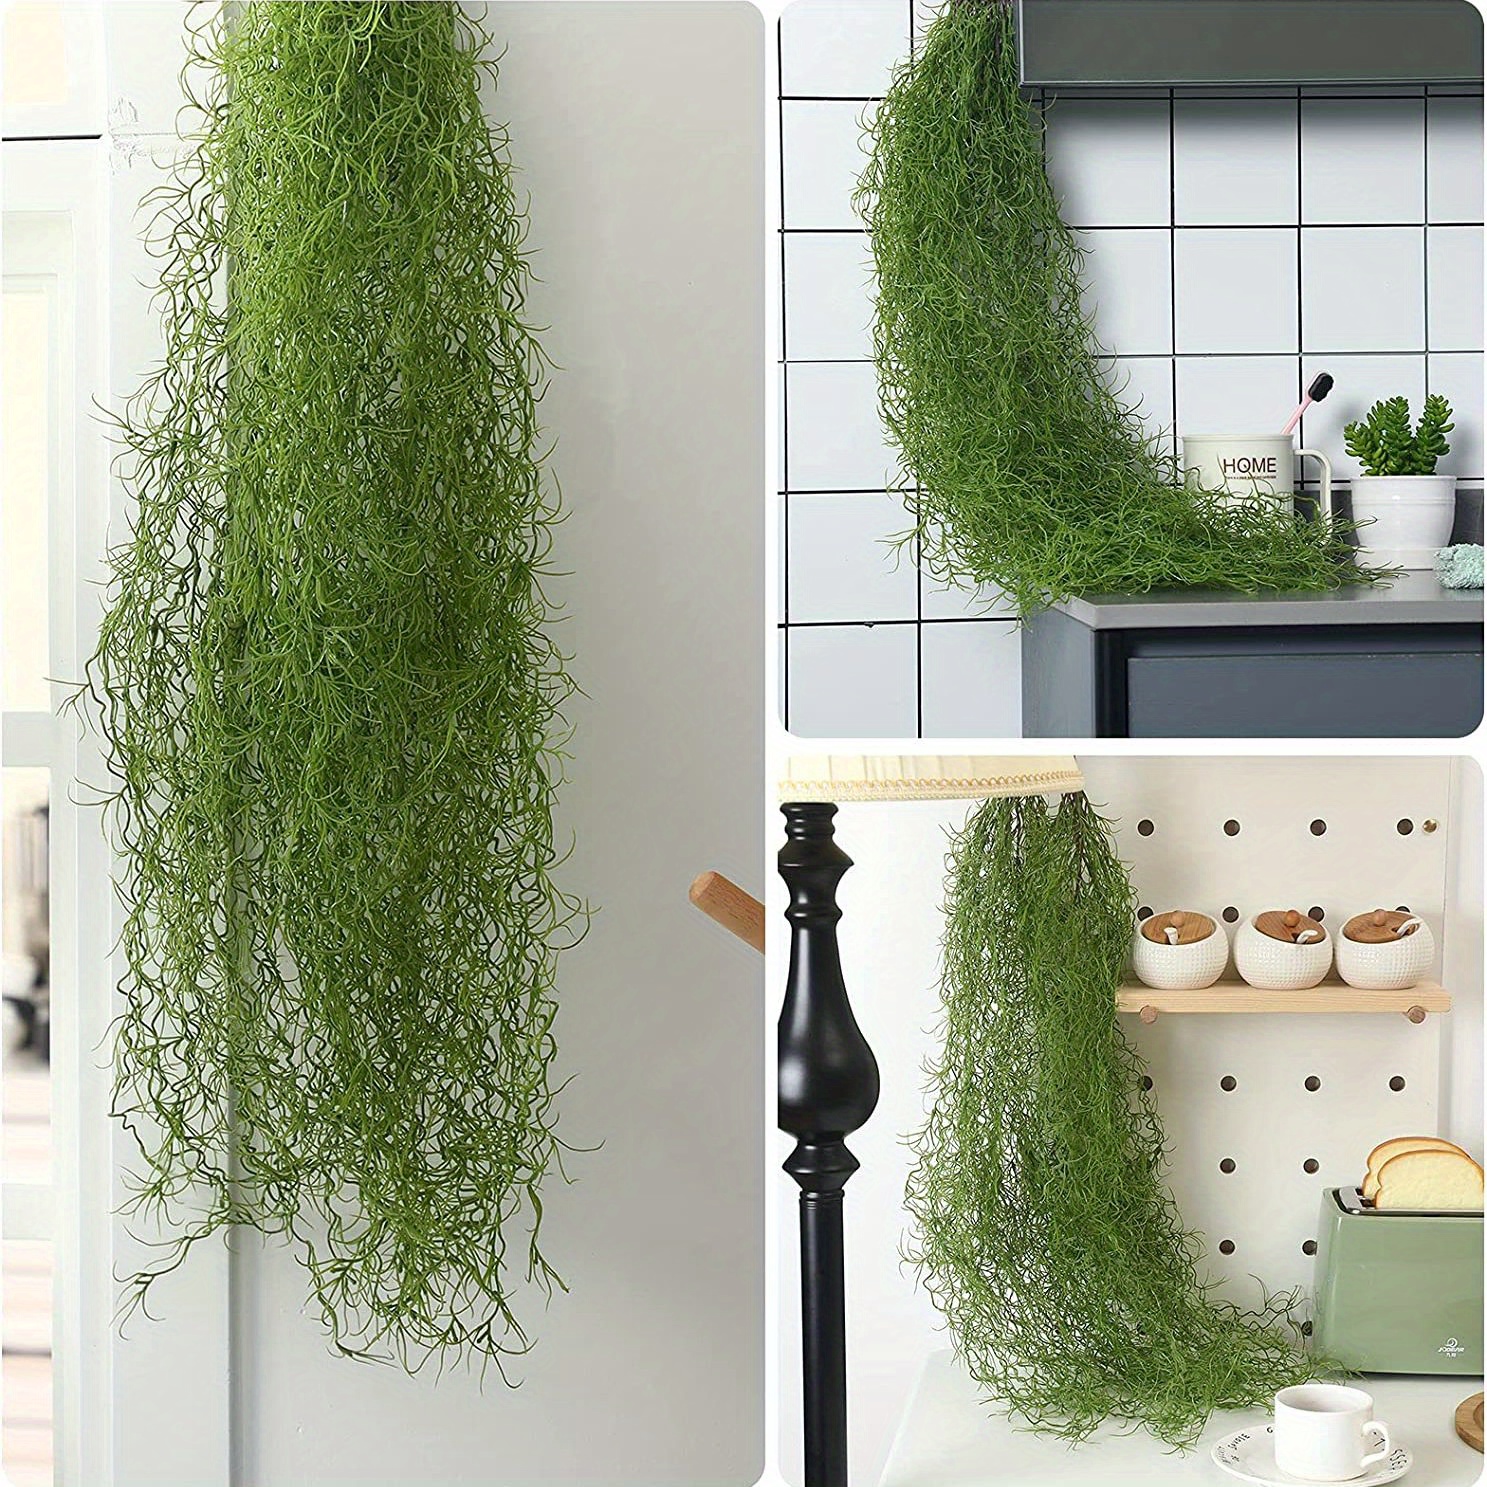 3-Pack Fake Spanish Moss, Artificial Moss for Plants, Indoor